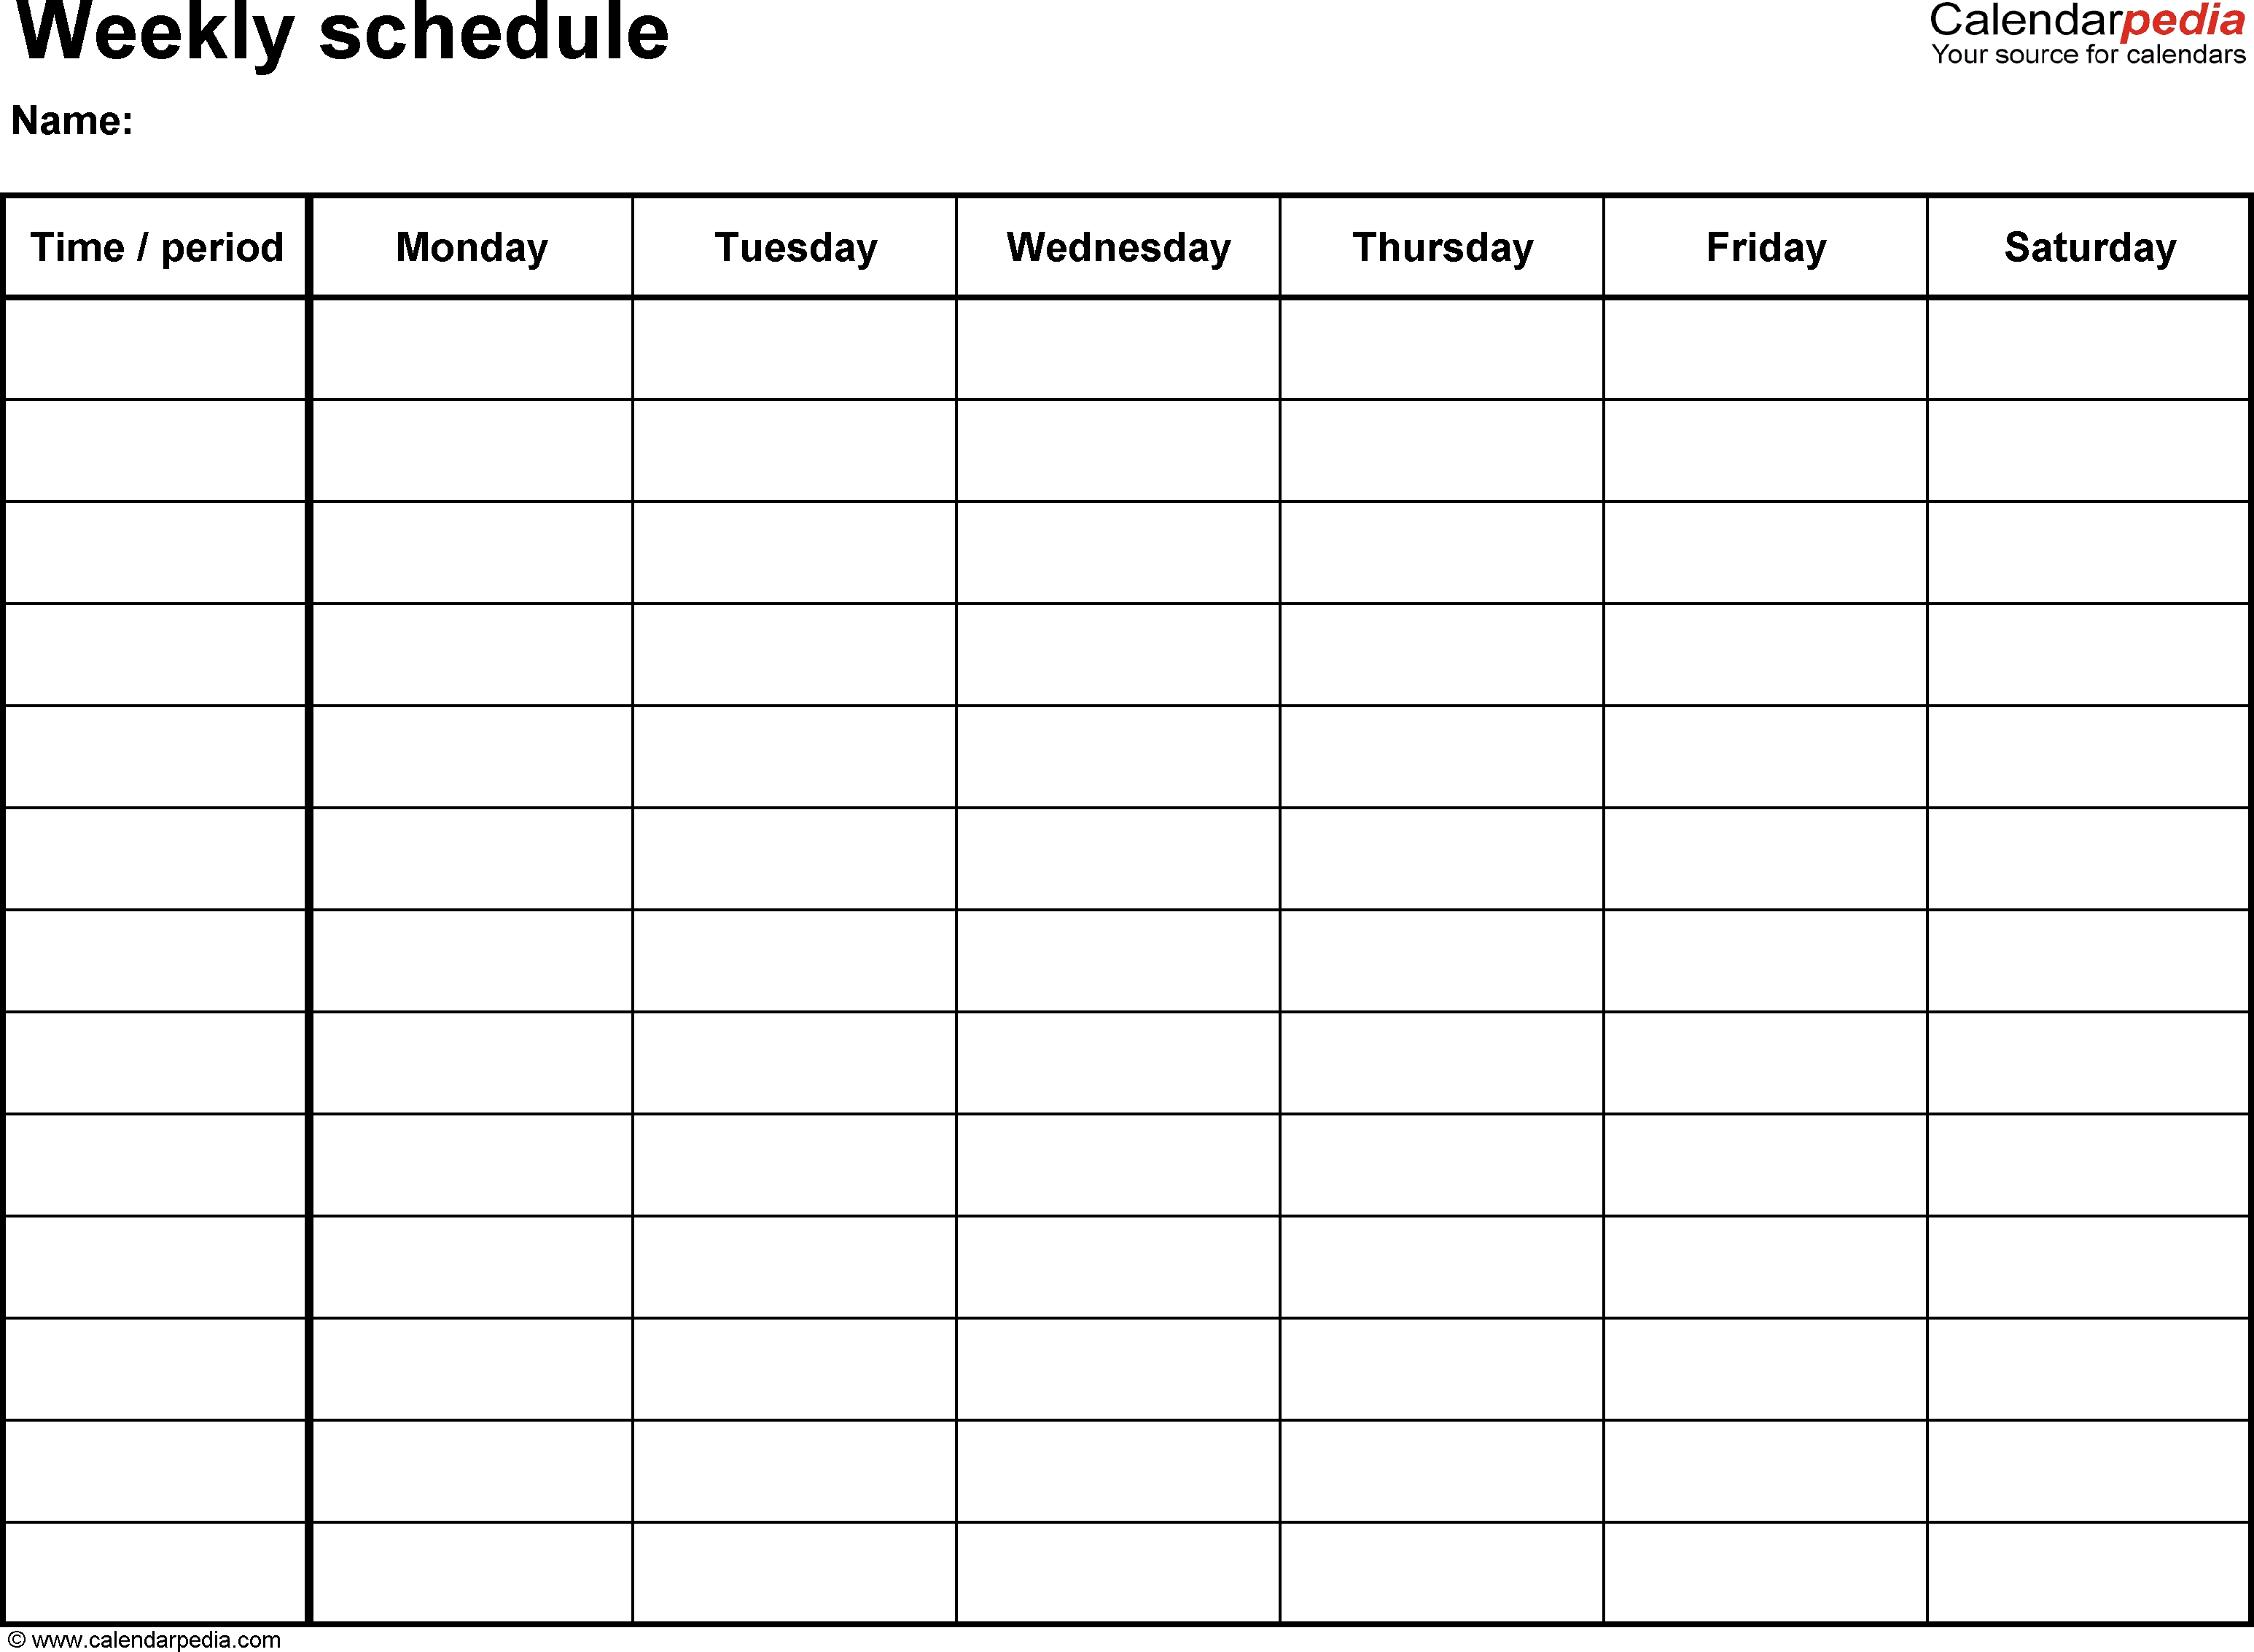 Free Weekly Schedule Templates For Word - 18 Templates with regard to Weekly Agenda Monday Through Friday